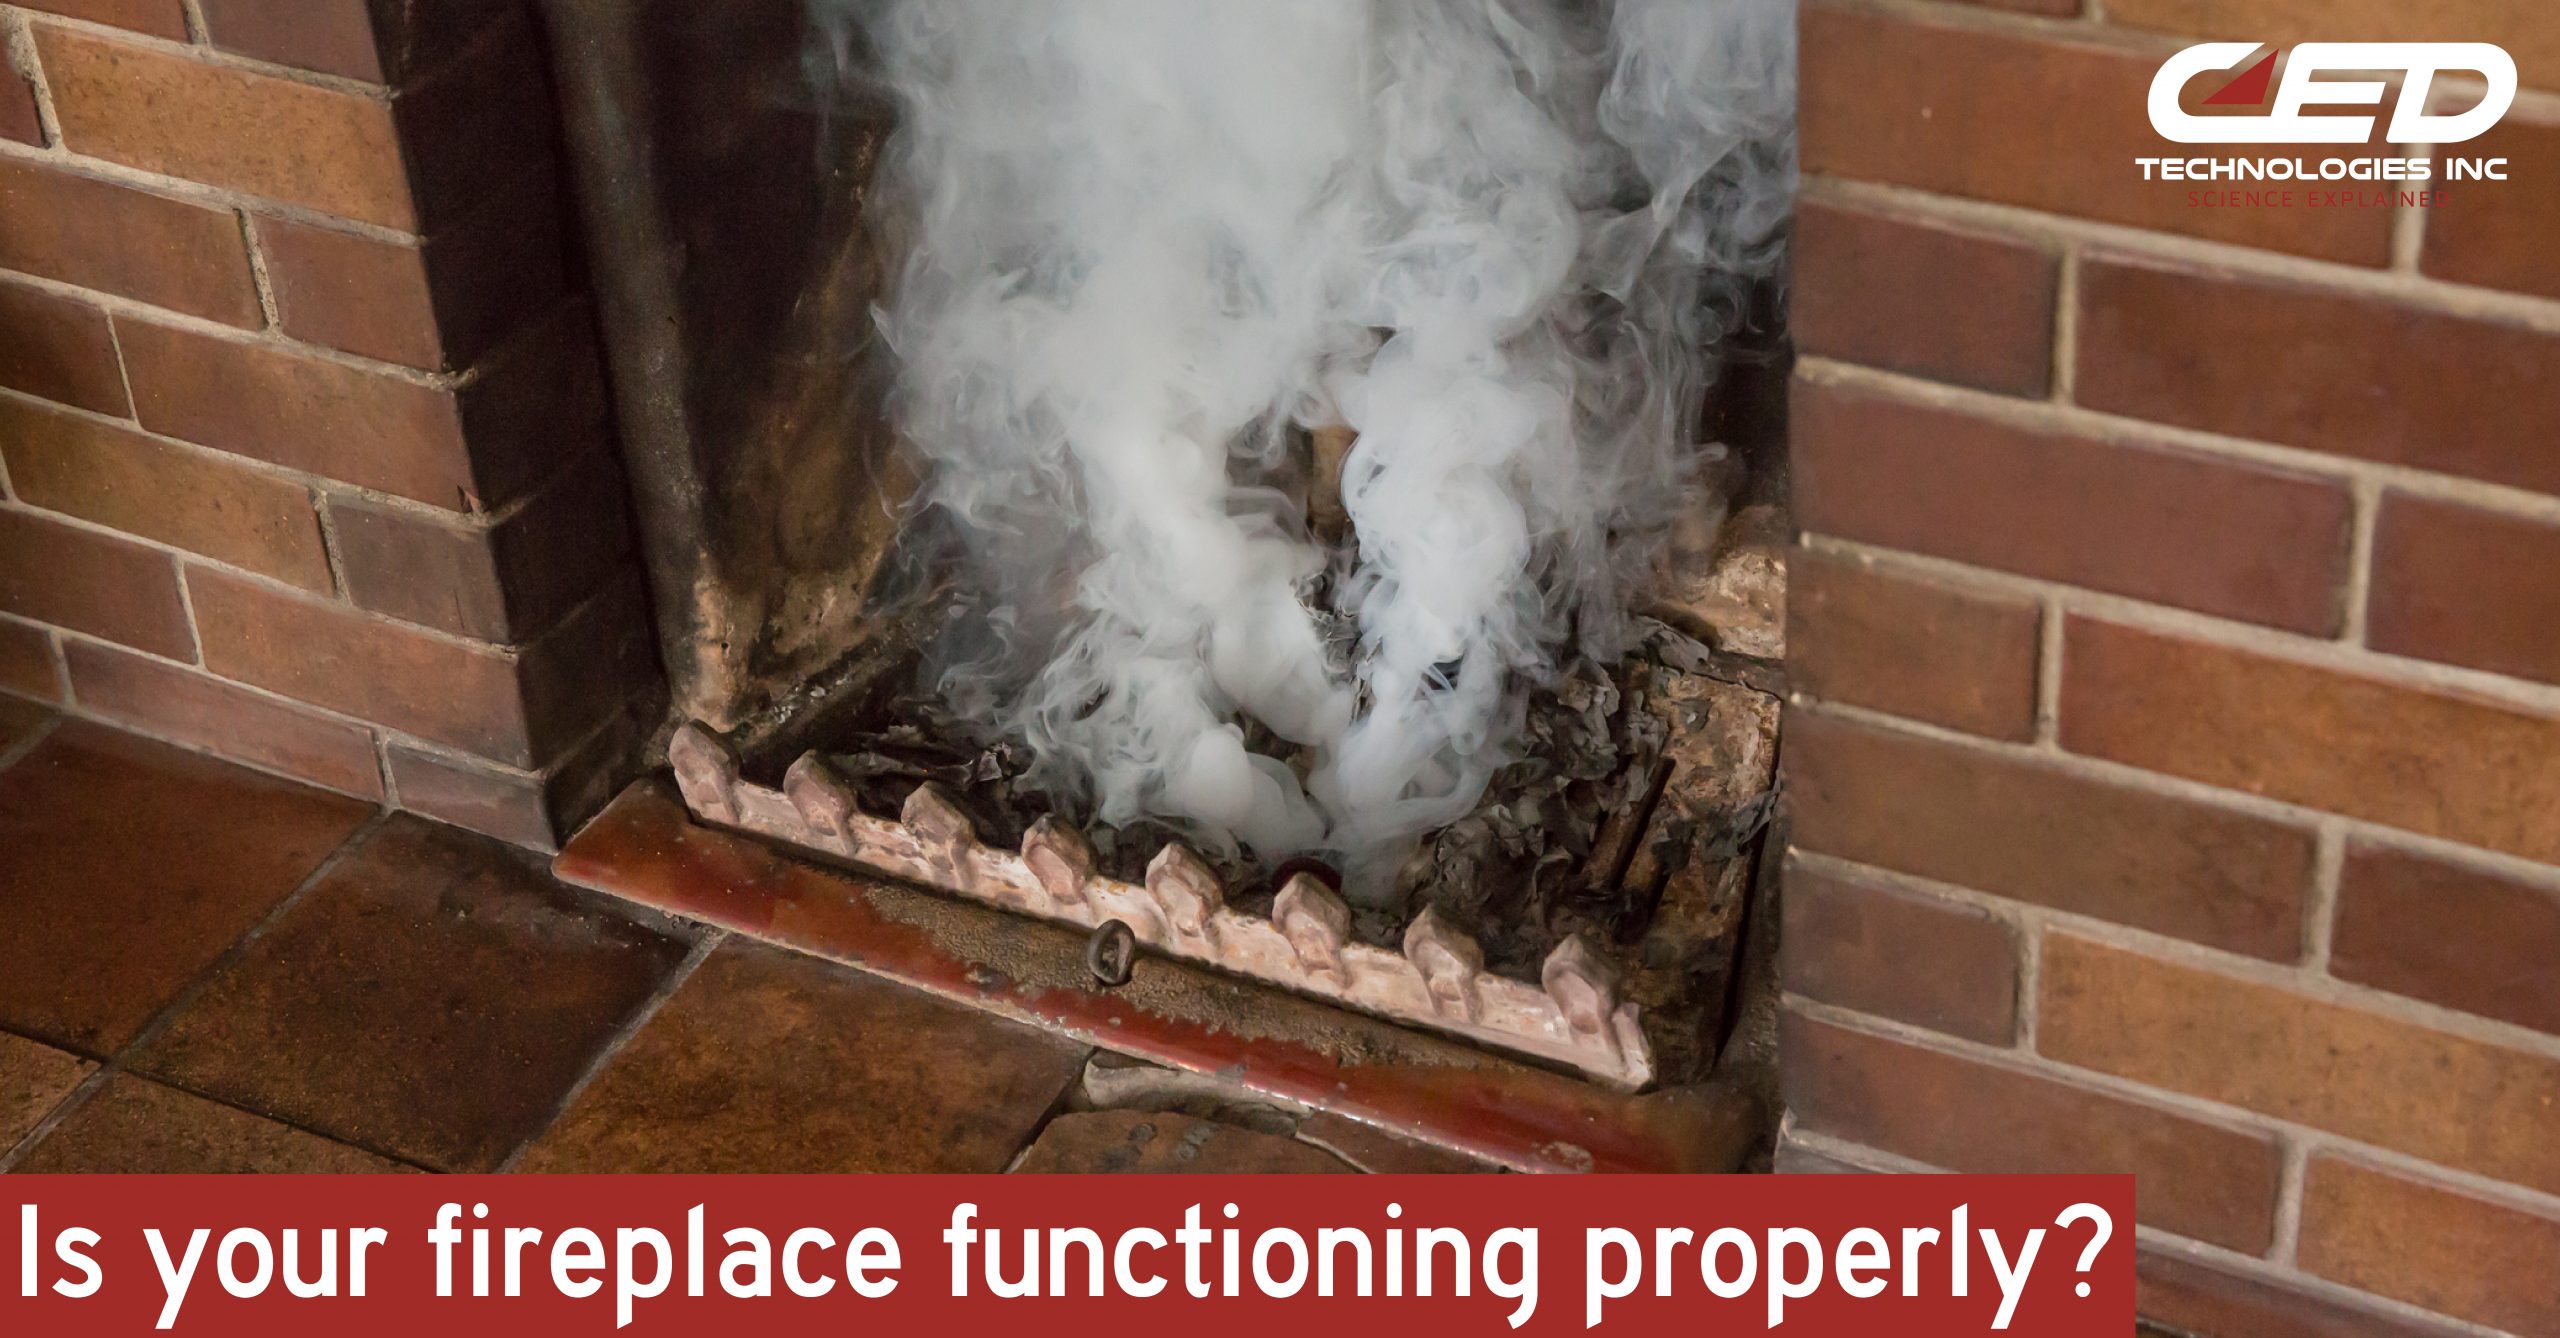 Fireplace Safety: What Does Smoke Signal?